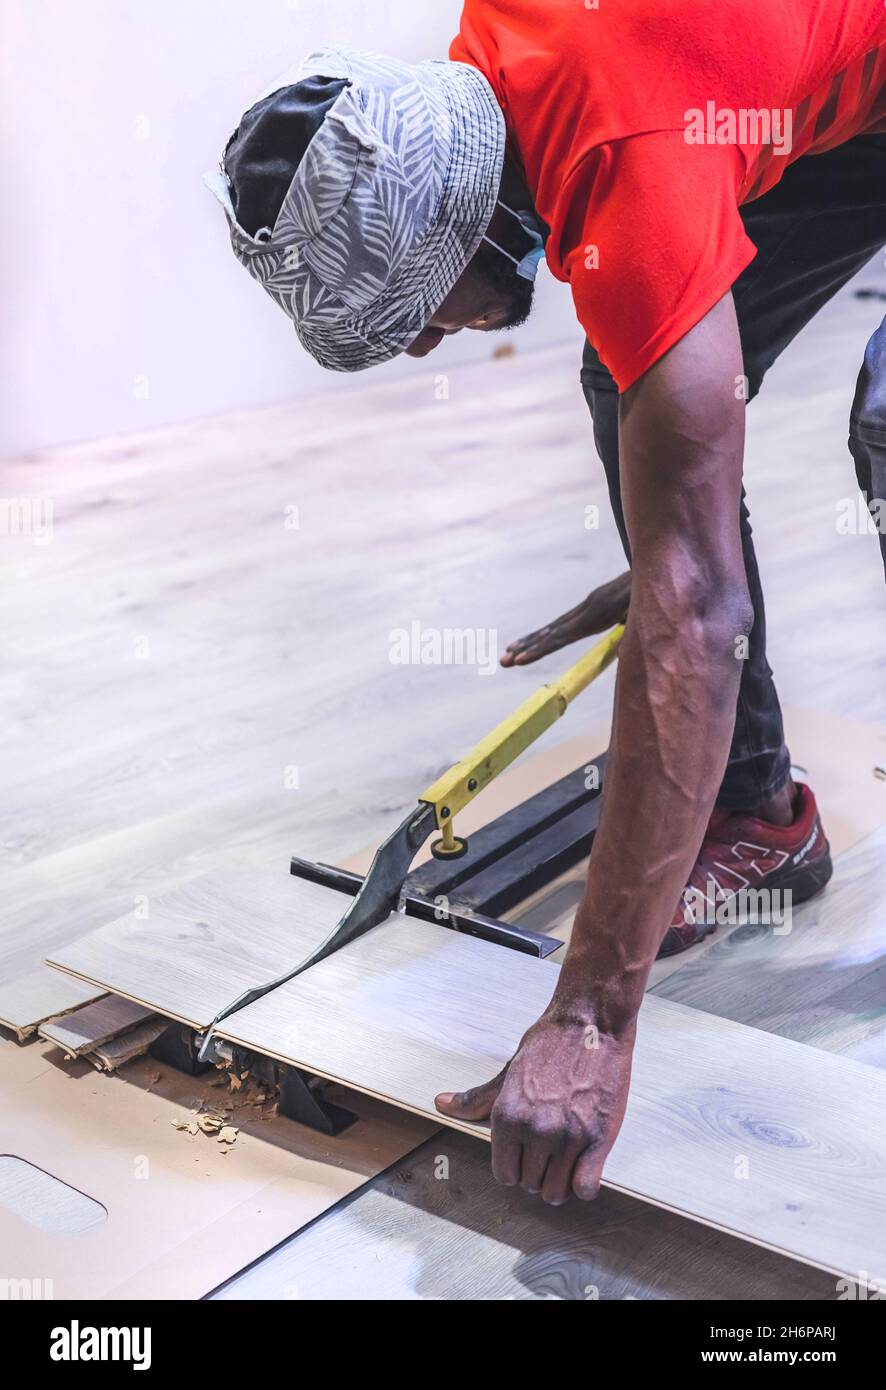 Johannesburg, South Africa - 15th November, 2021: Man cutting flooring planks with a cutter. Stock Photo